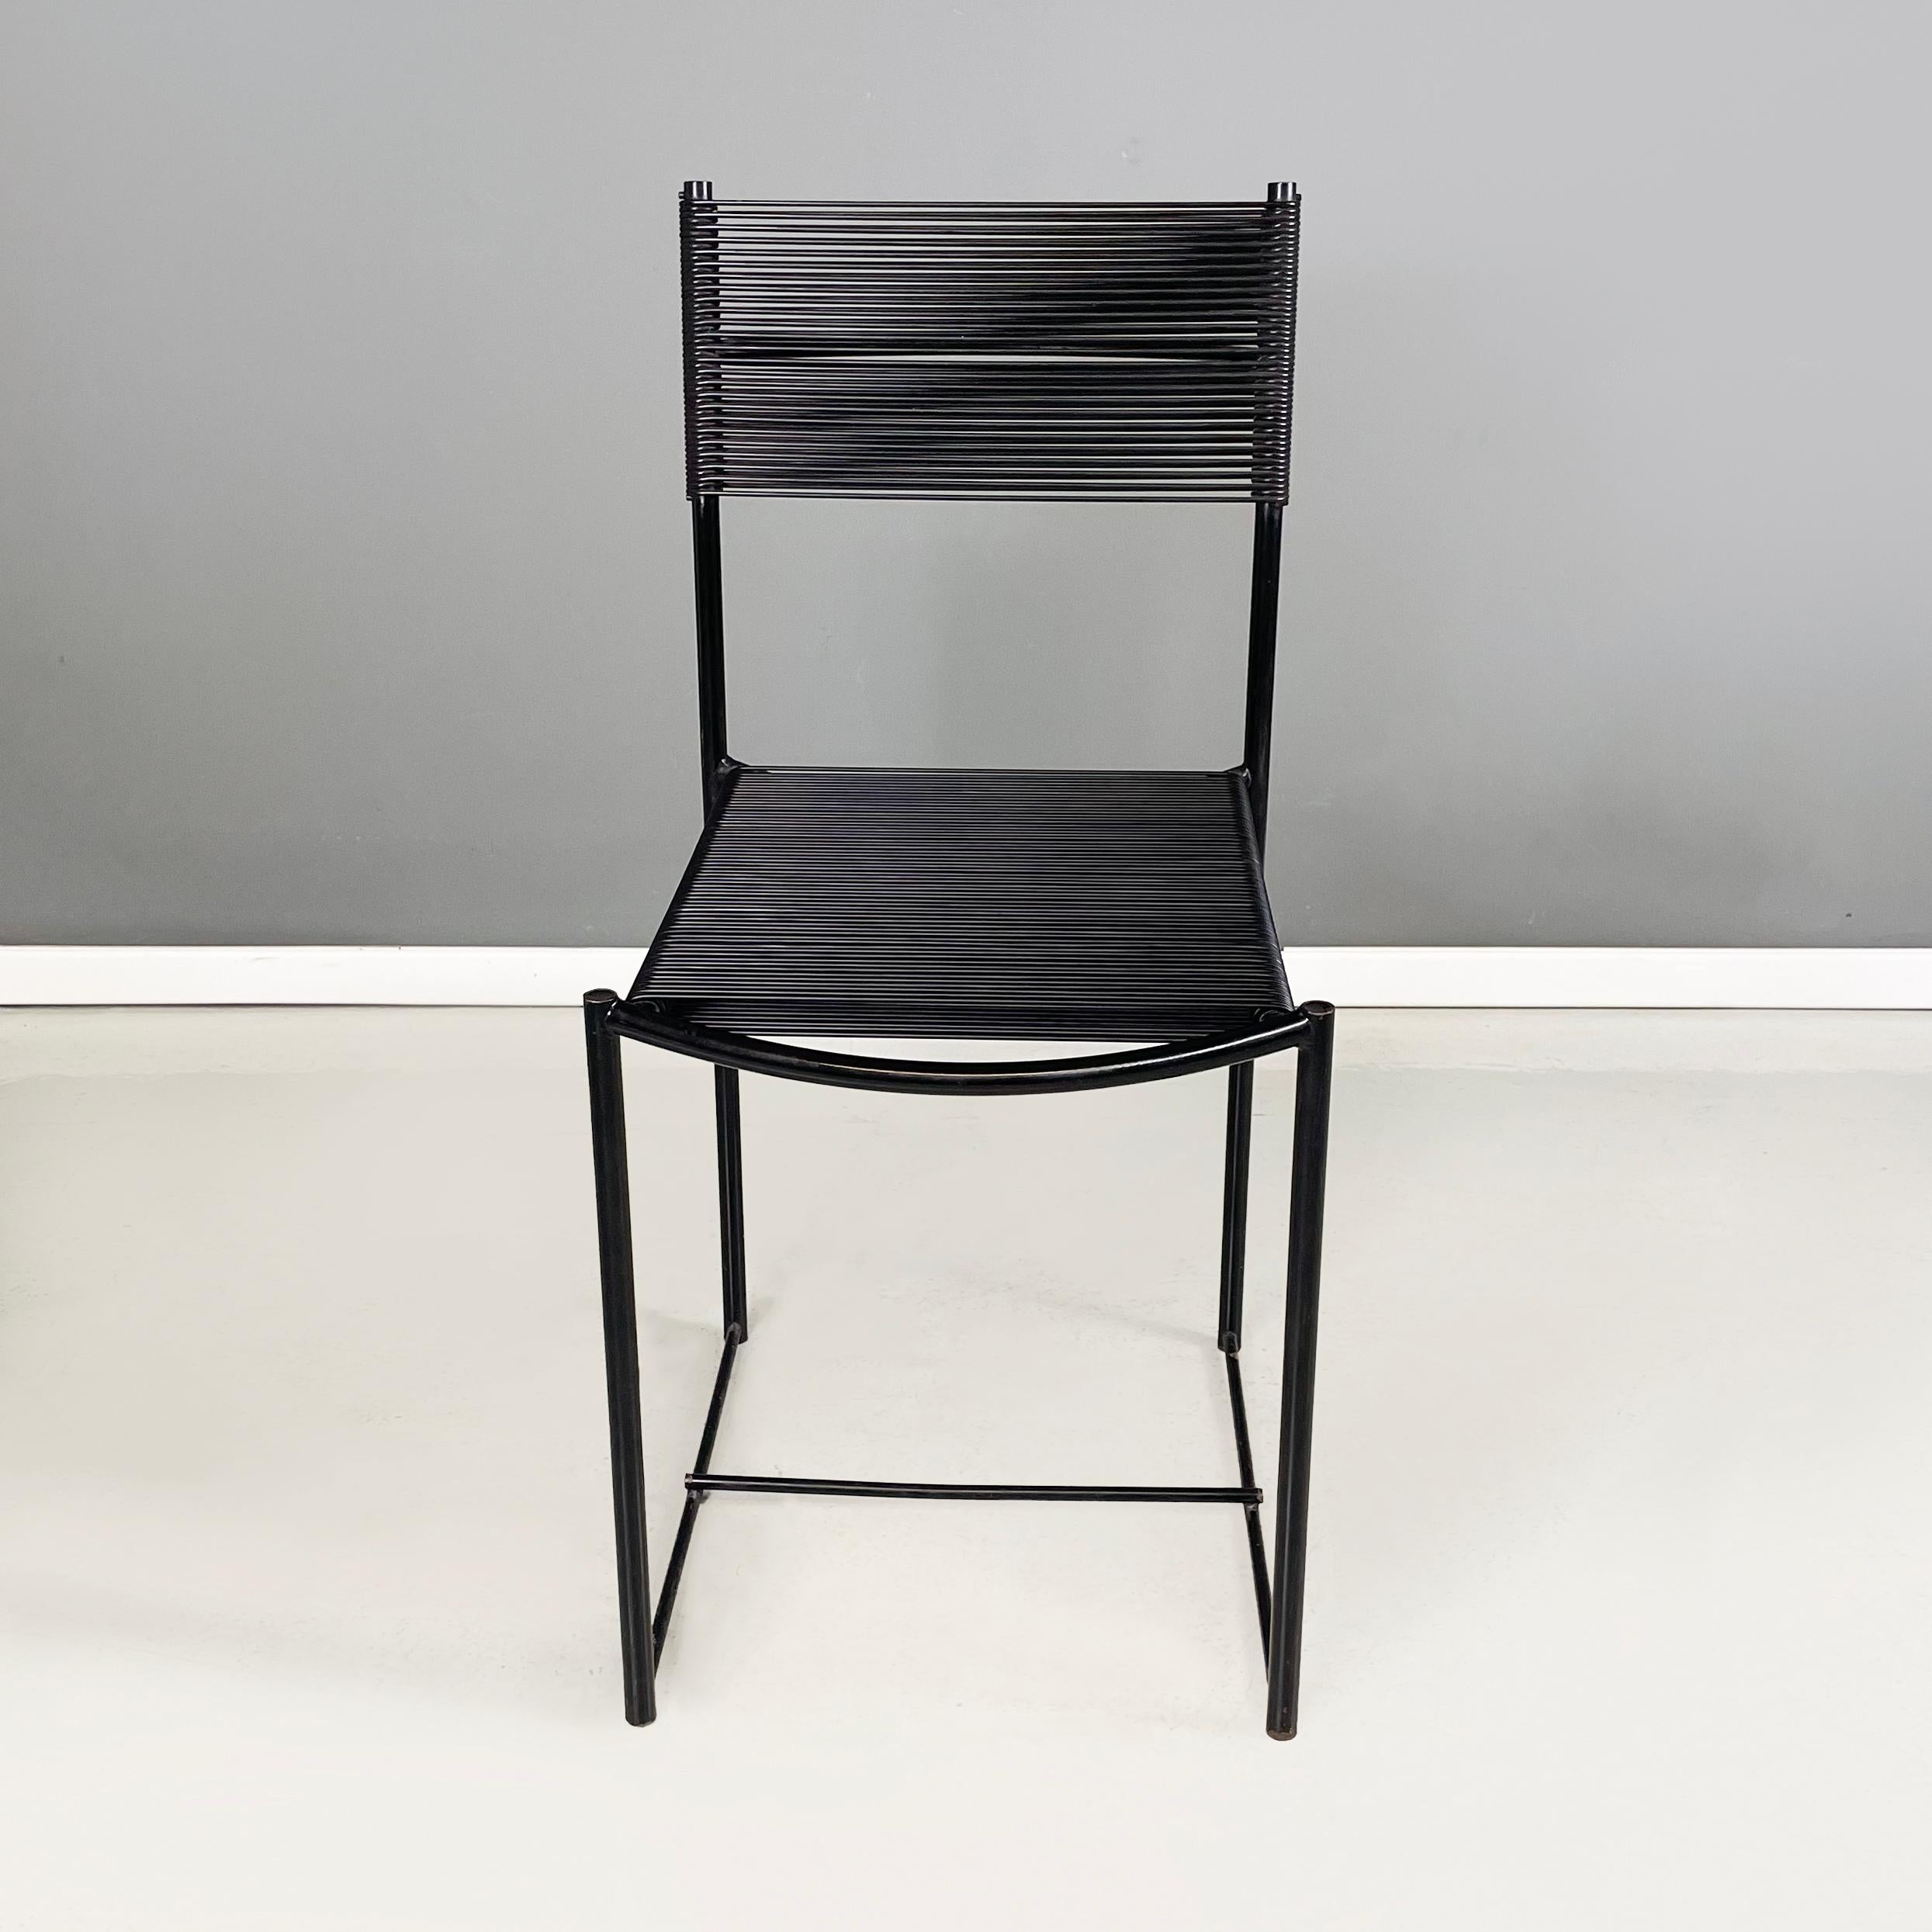 Italian modern black Chair Spaghetti by Giandomenico Belotti for Alias, 1980s
Chair mod. Spaghetti  with rectangular and elastic seat and back made from black scooby threads. The structure is in black painted metal rod with curved handle behind the